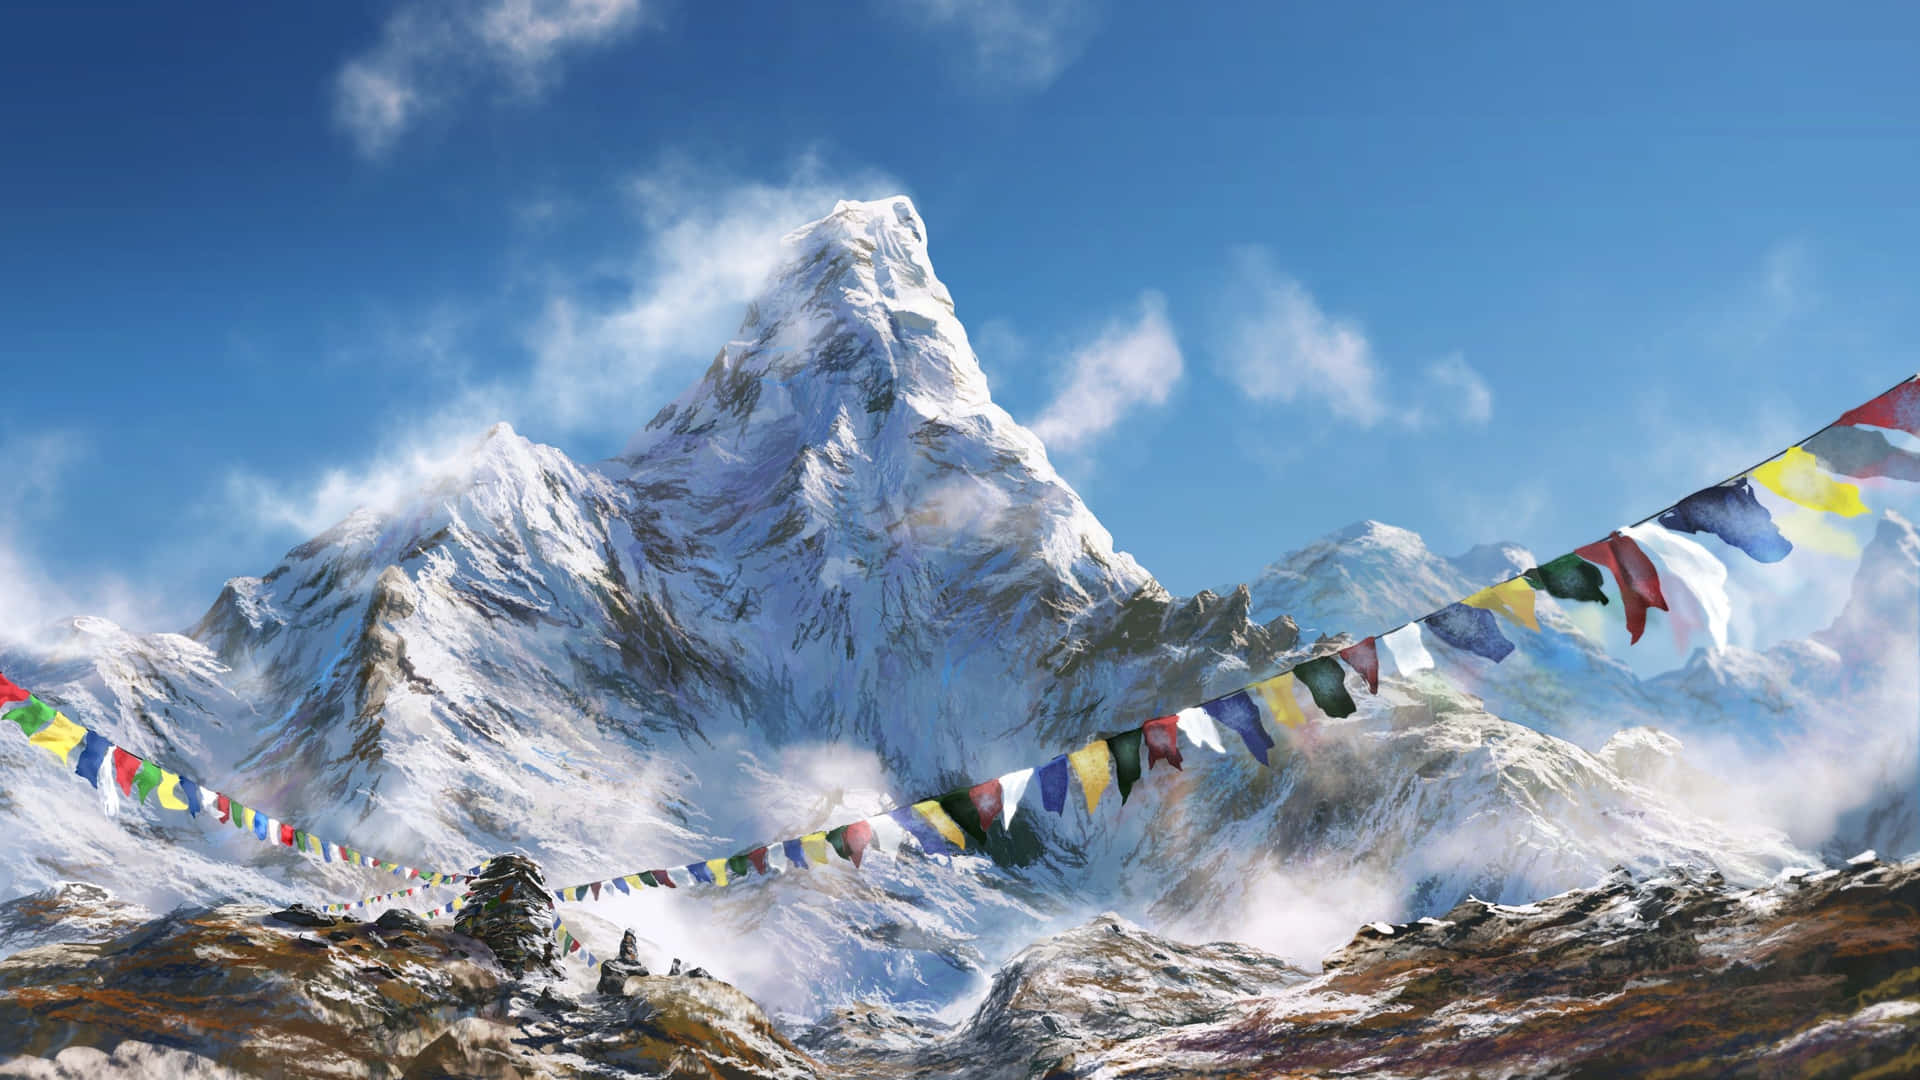 A Mountain Scene With Prayer Flags And Snow